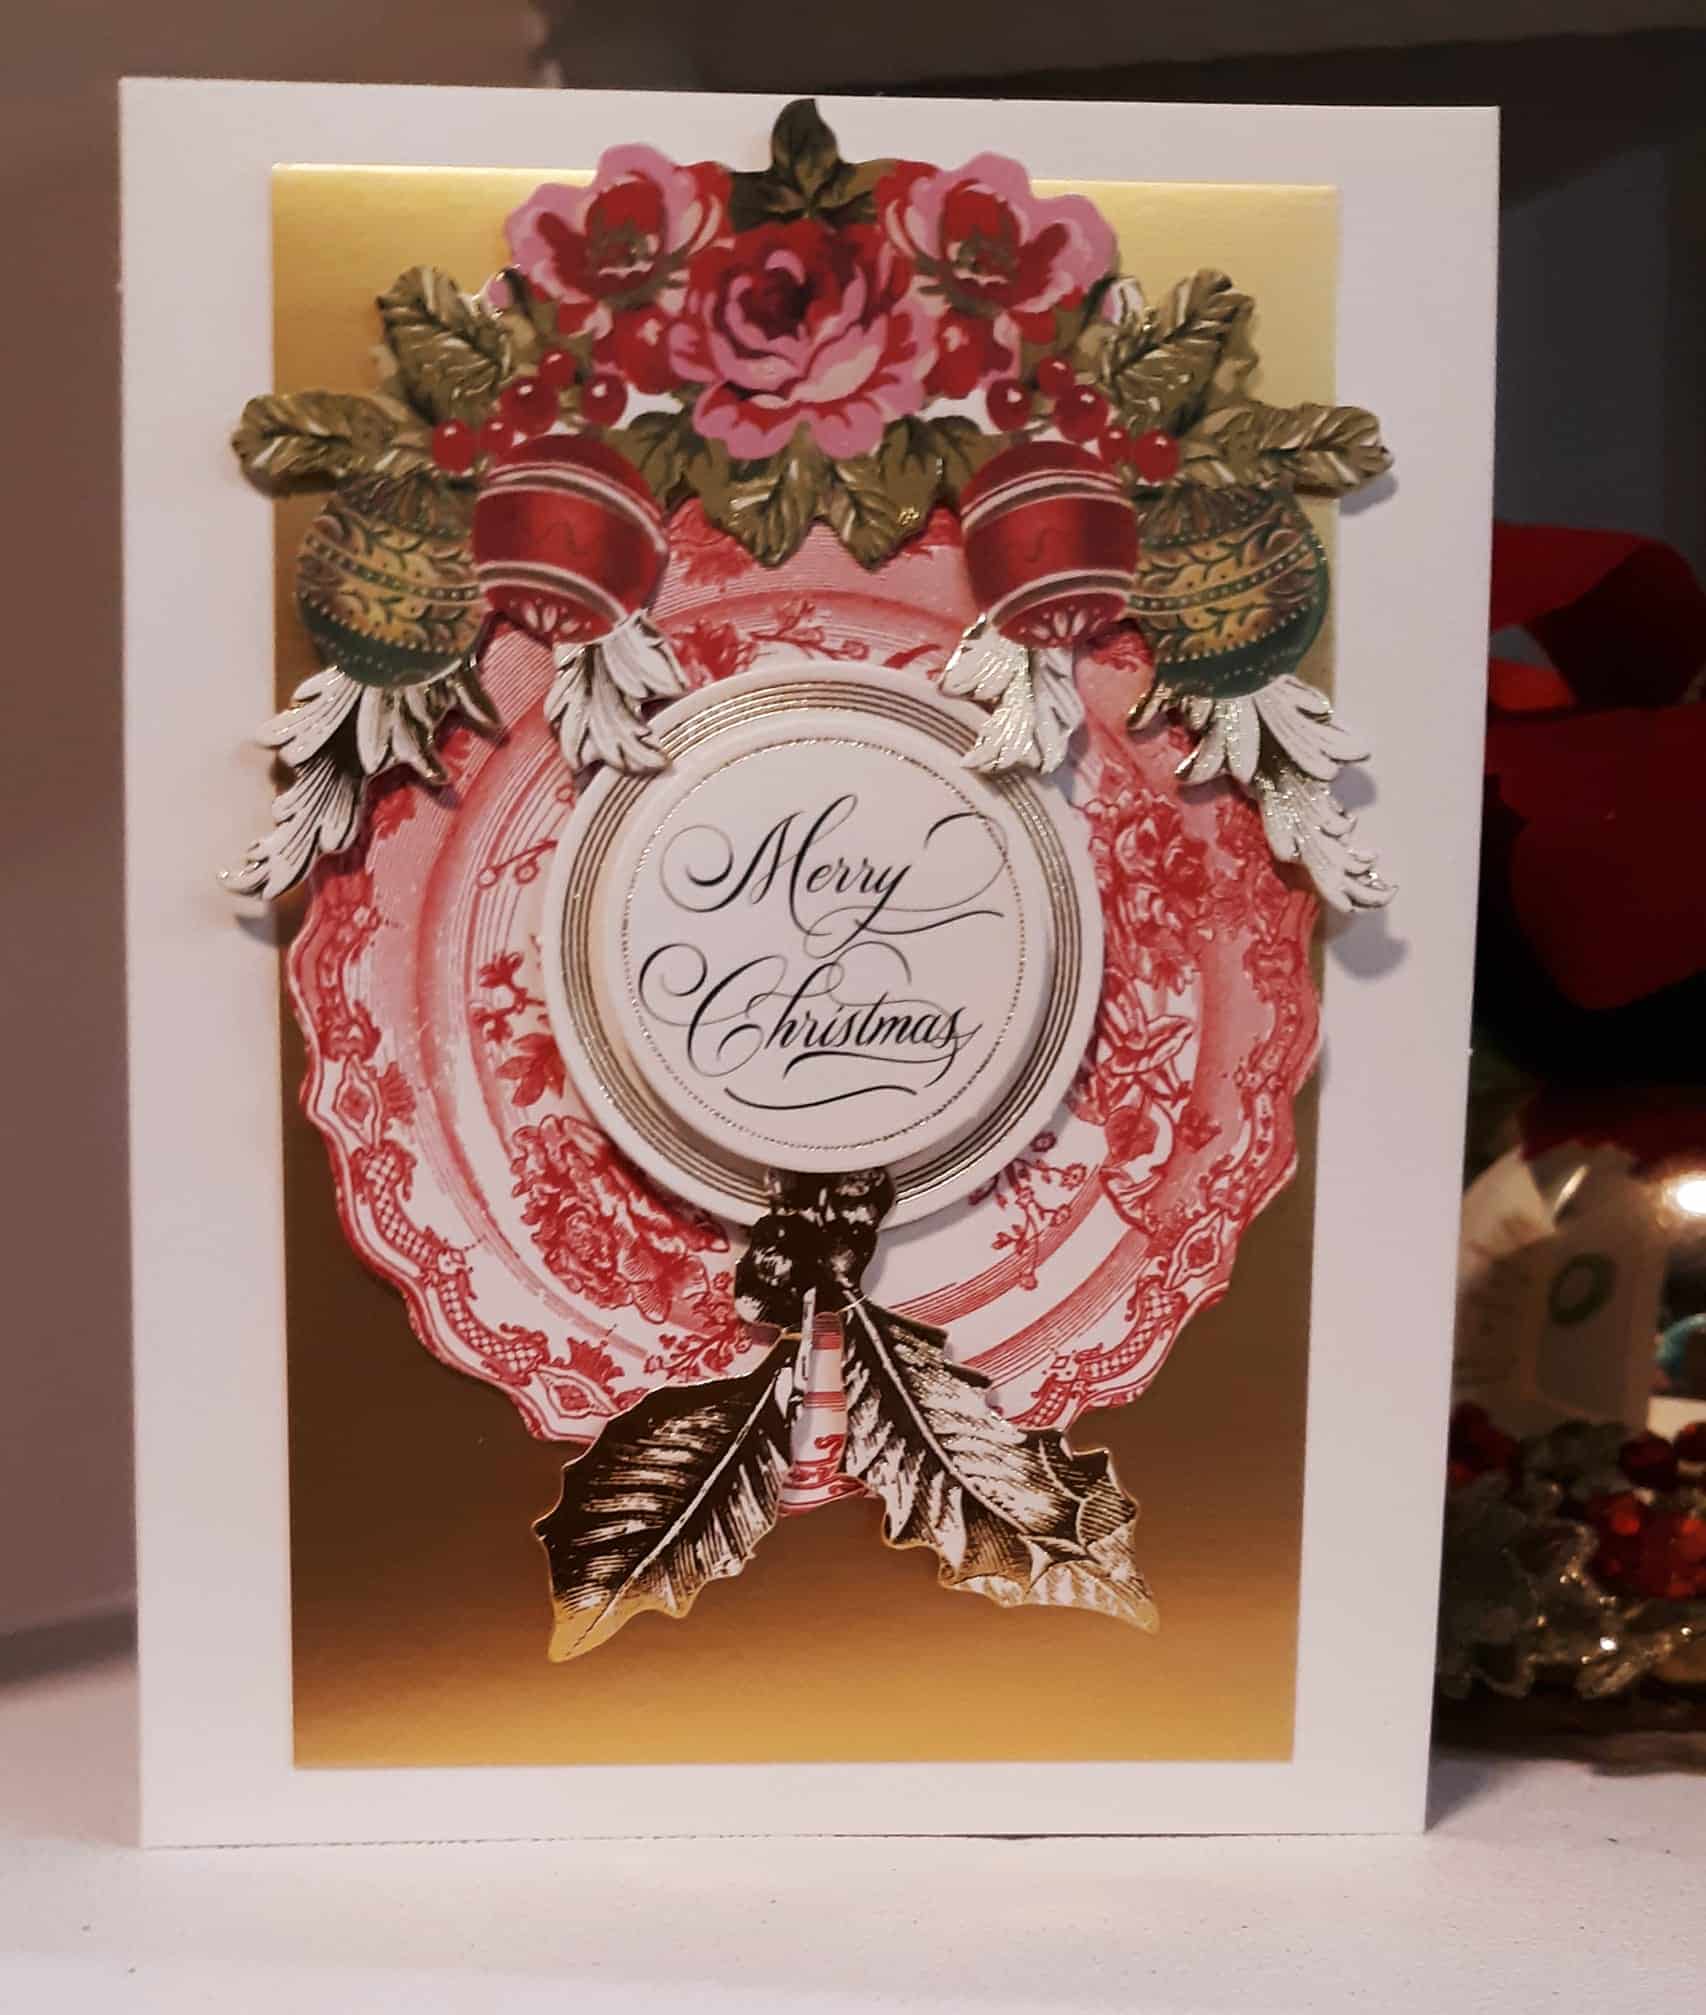 A merry christmas card with red and gold decorations.